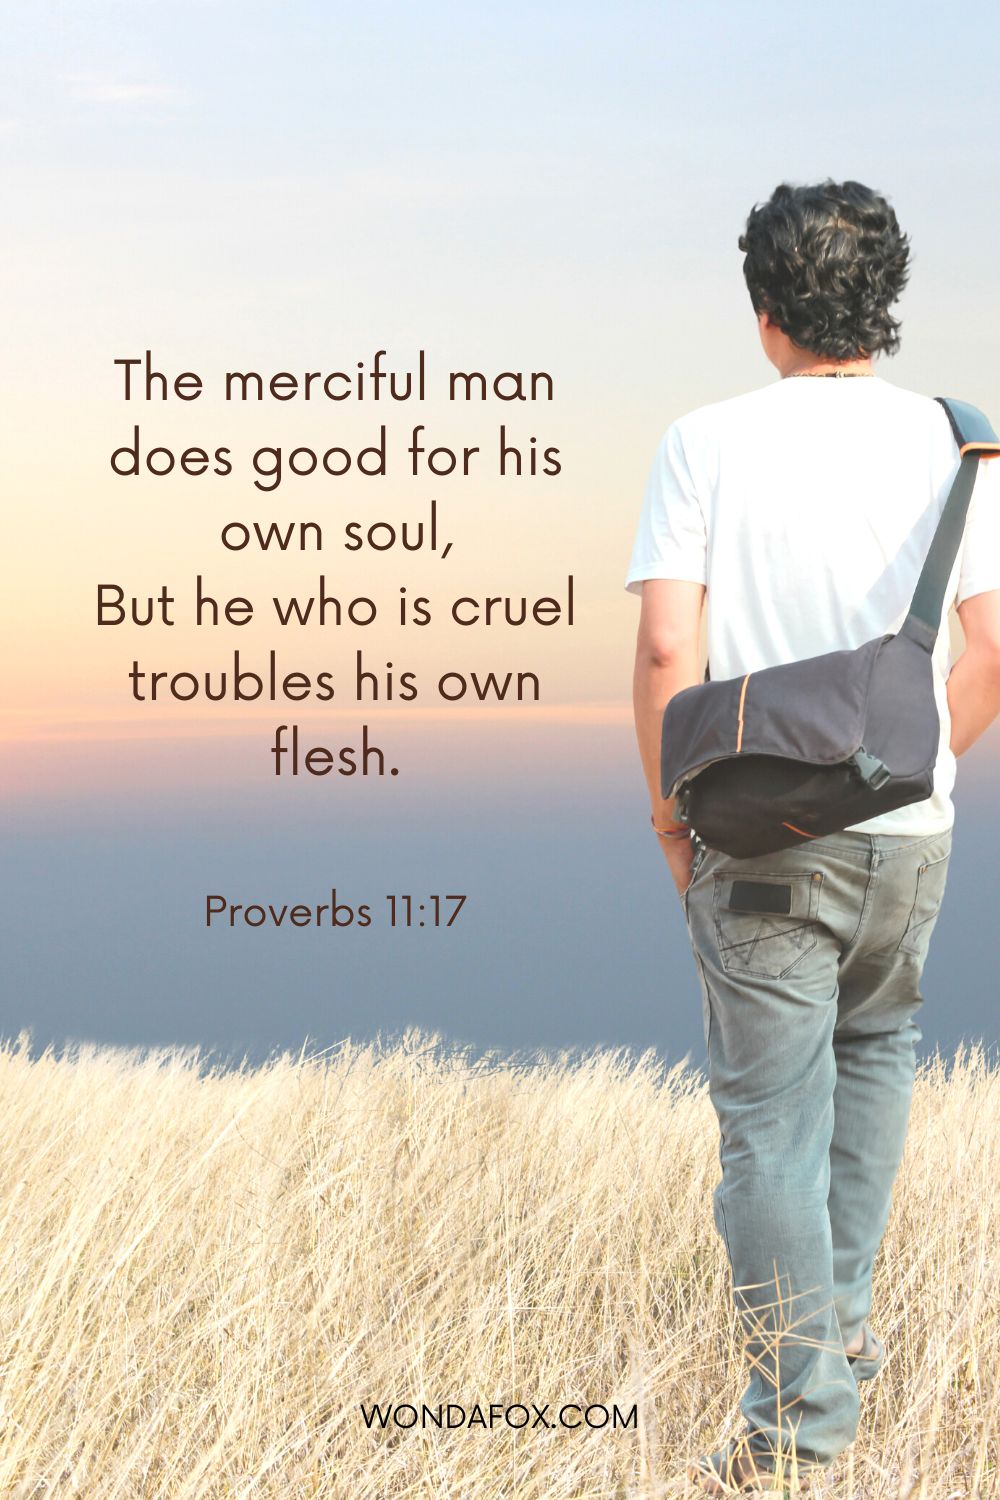 The merciful man does good for his own soul, But he who is cruel troubles his own flesh.